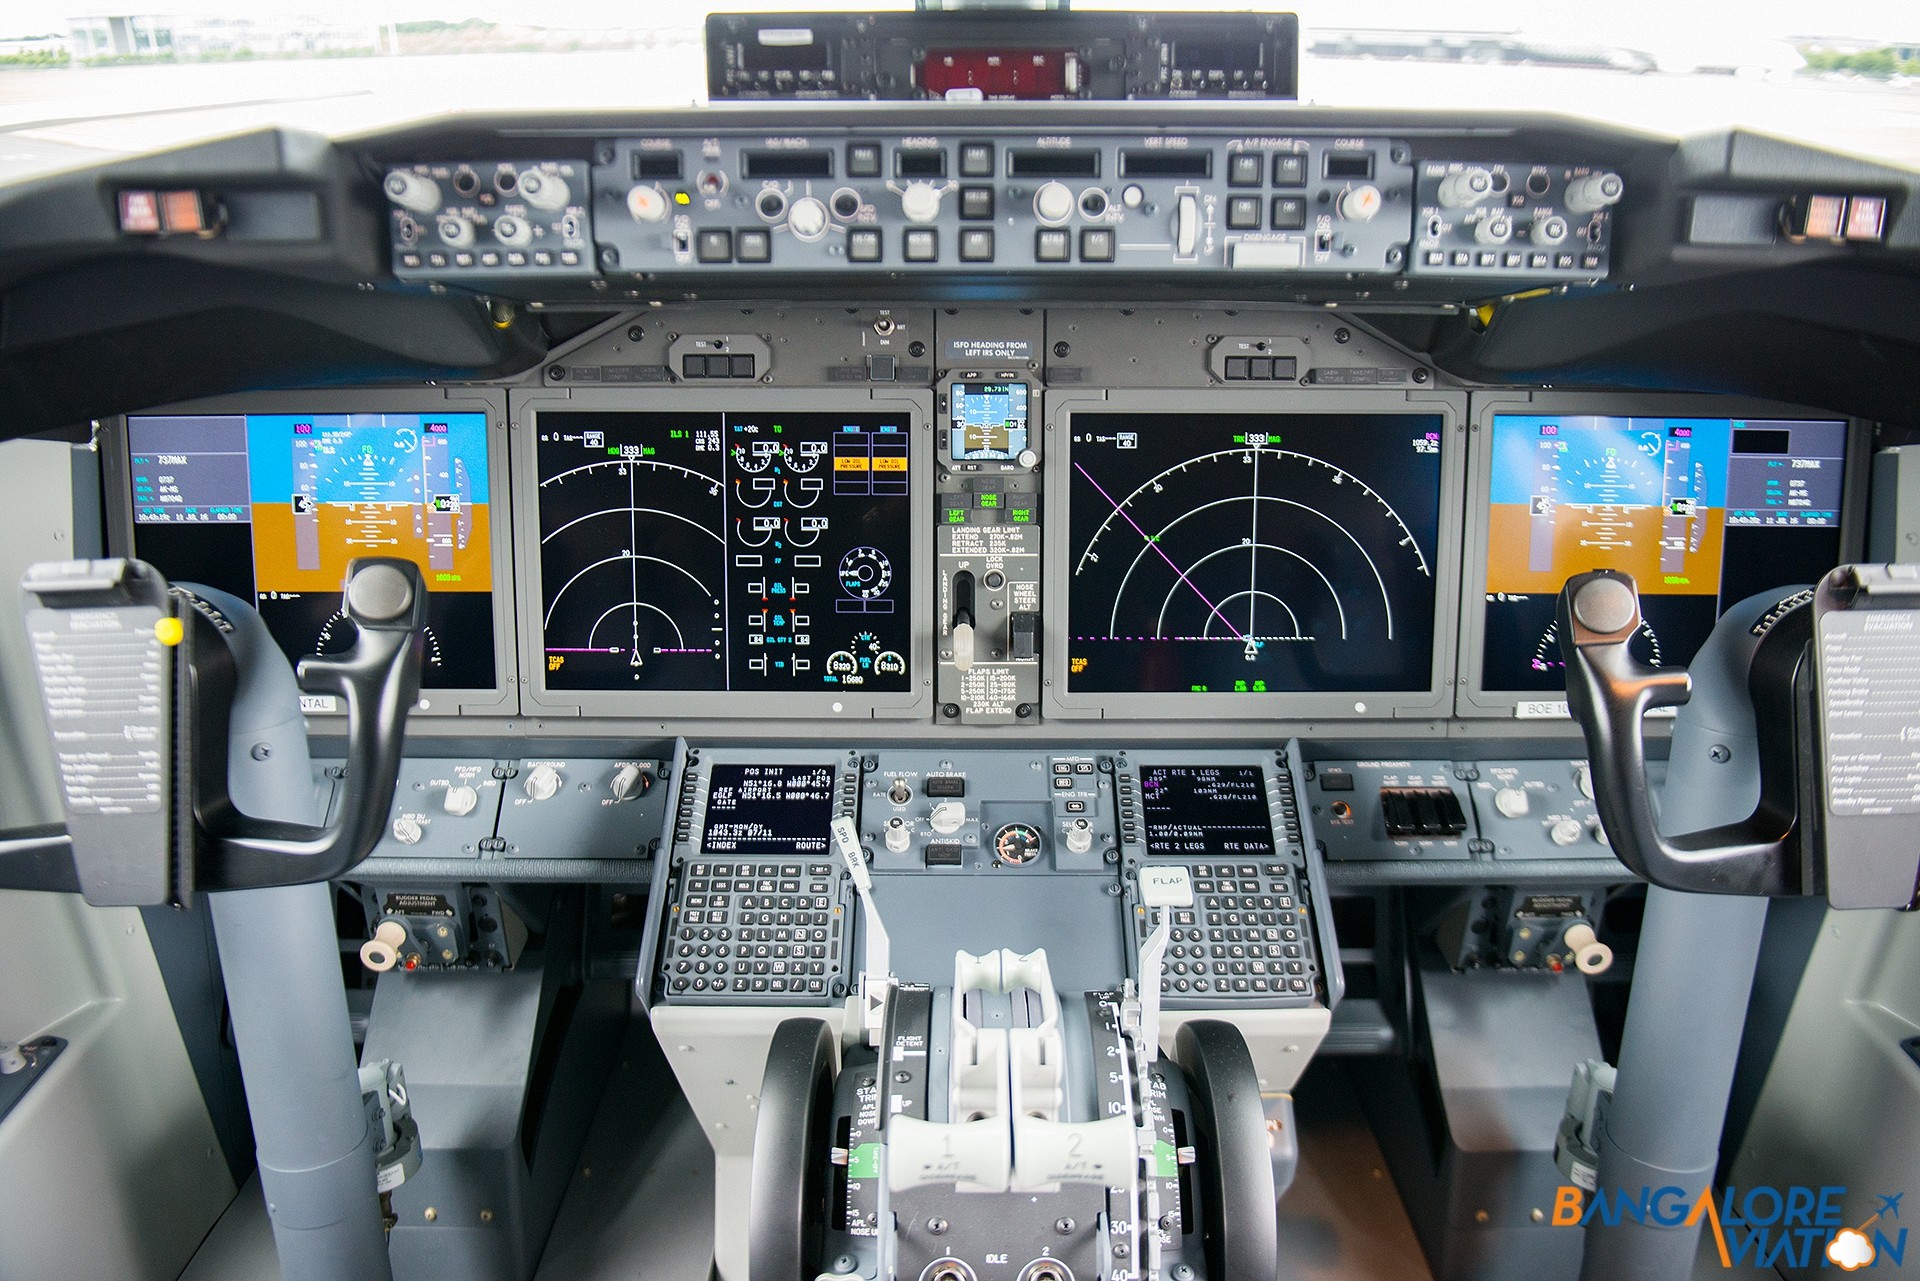 The new flightdeck with Large Format Displays.